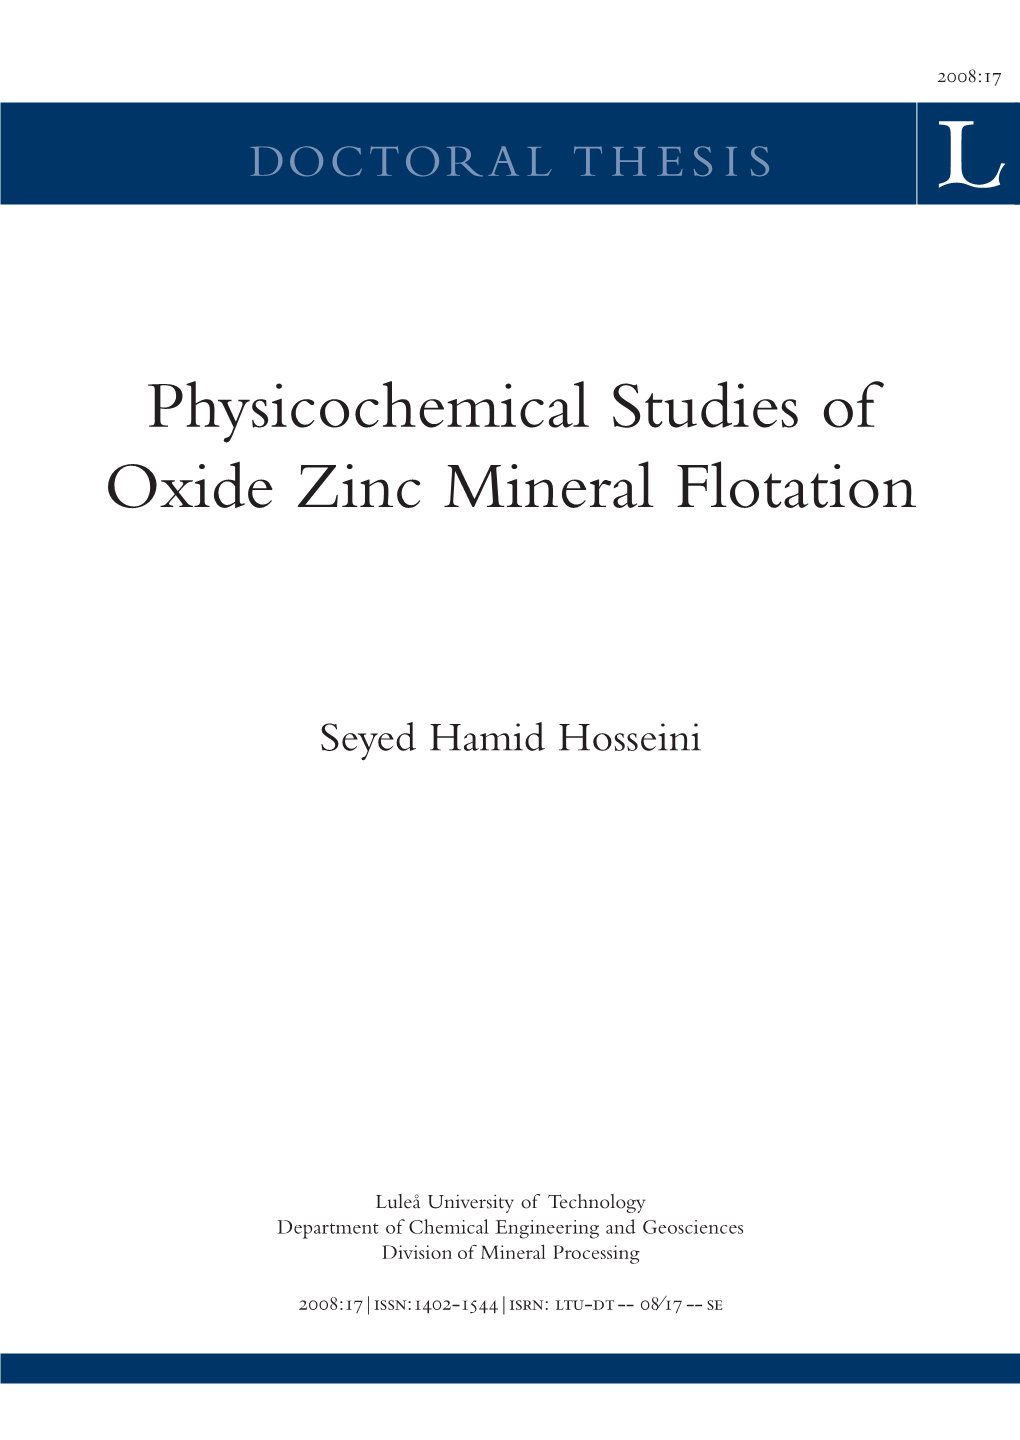 Physicochemical Studies of Oxide Zinc Mineral Flotation Mineral Zinc Oxide of Physicochemicalstudies